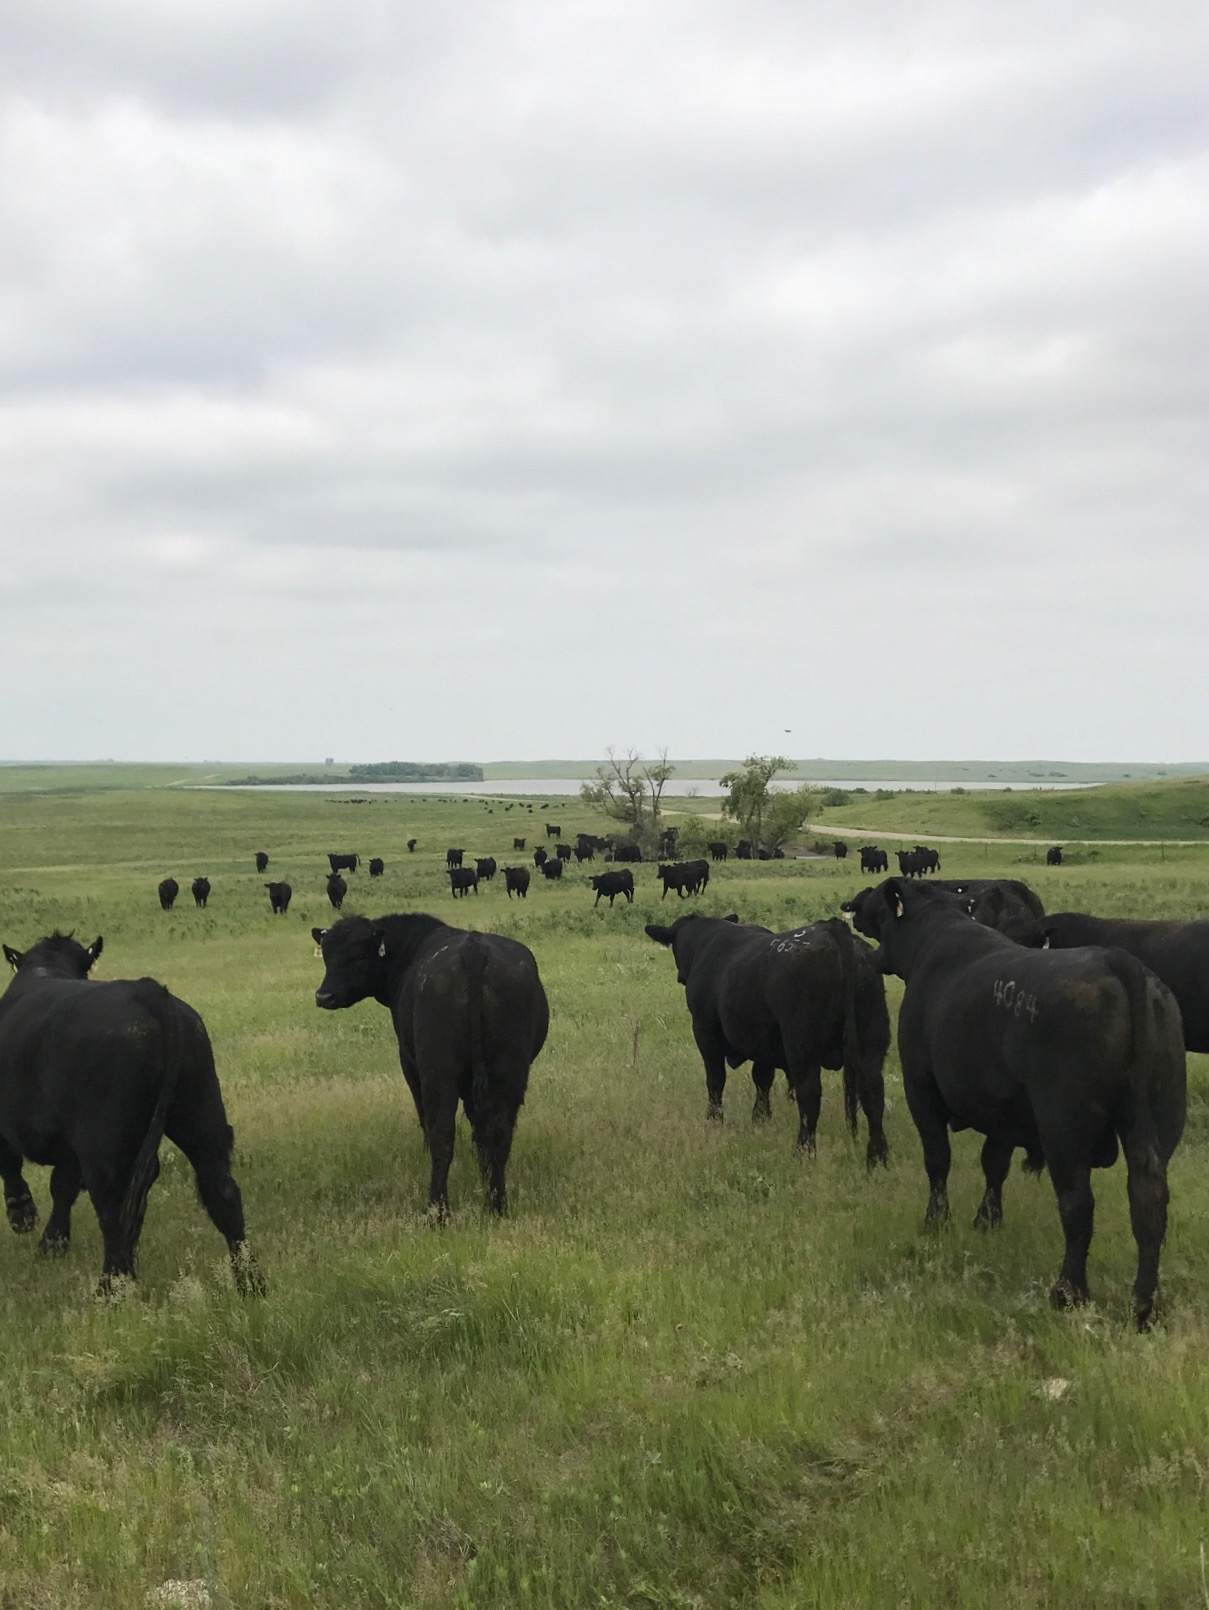 Afternoon Ag News, May 17, 2021: Meatpacking industry hit hard by COVID